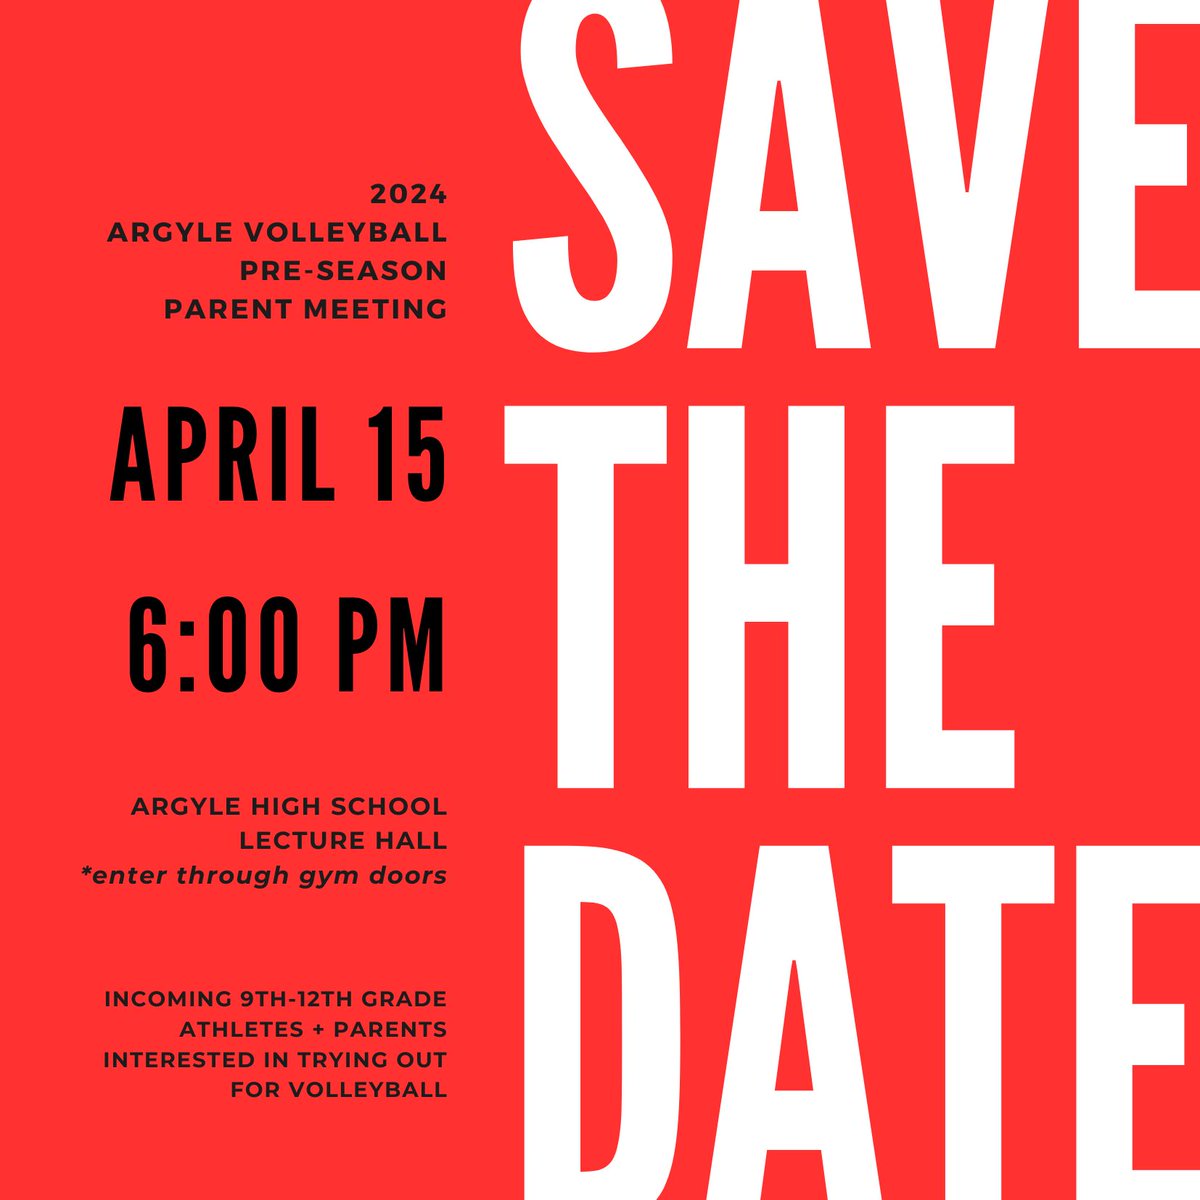 Interested in trying out for Argyle Volleyball? 👀 Make plans to attend our pre-season athlete & parent meeting on Monday, April 15th! We will go over the 2024 Summer Calendar, Tryouts, Season Schedule, Volunteer Opportunities, Gear and MORE! ❤️🖤 Details ⬇️